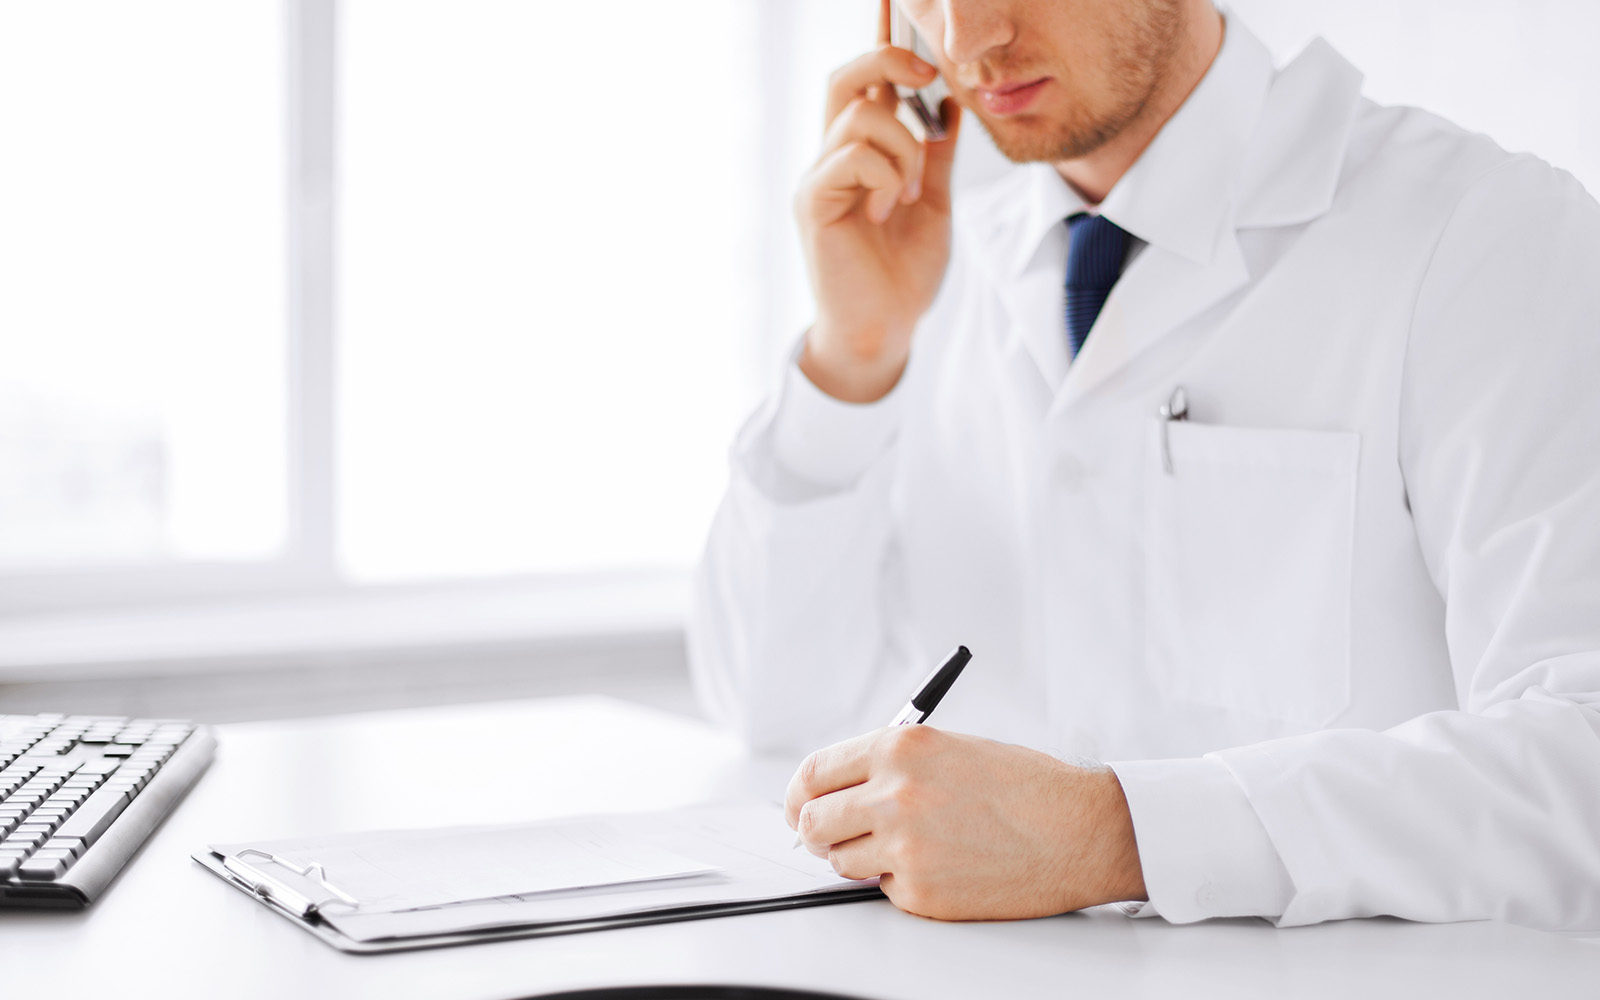 A doctor writing on a clipboard